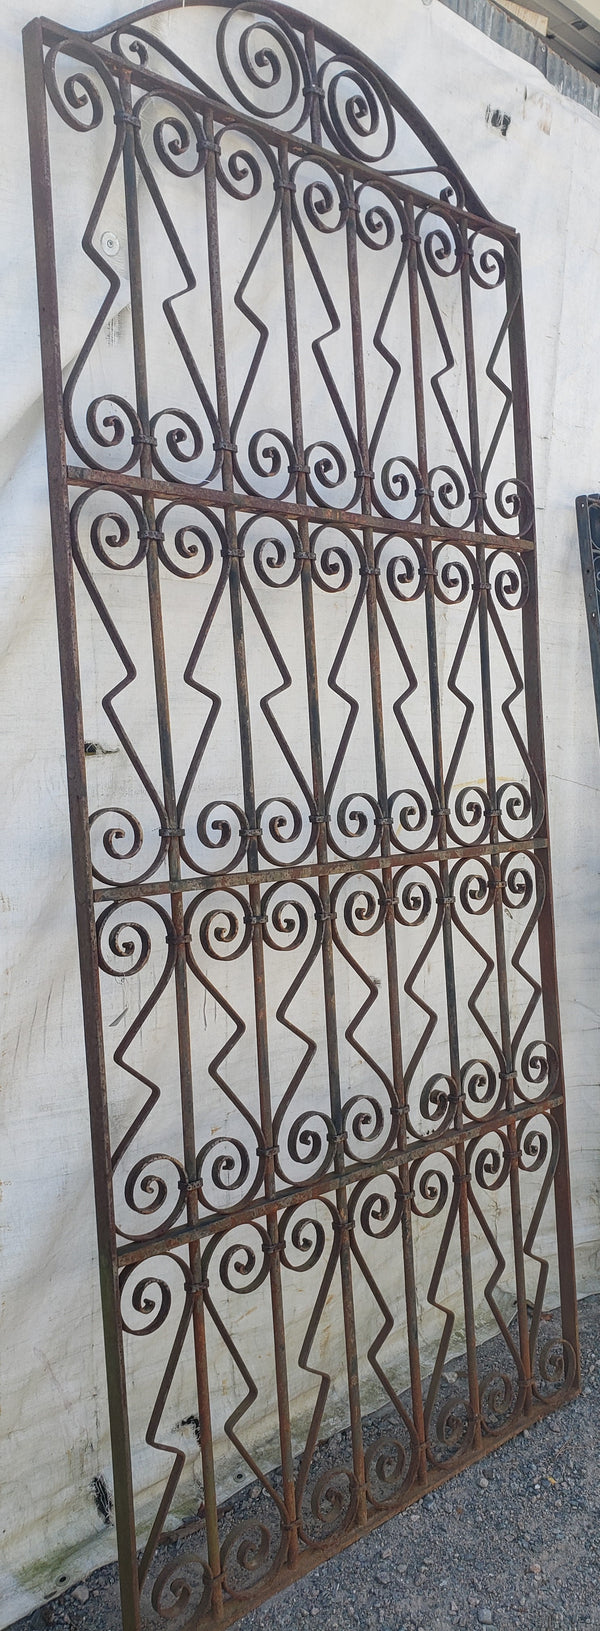 Arched Top Wrought Iron Gate with Geometric Designs 109 1/2" x 46 1/2" GA9500